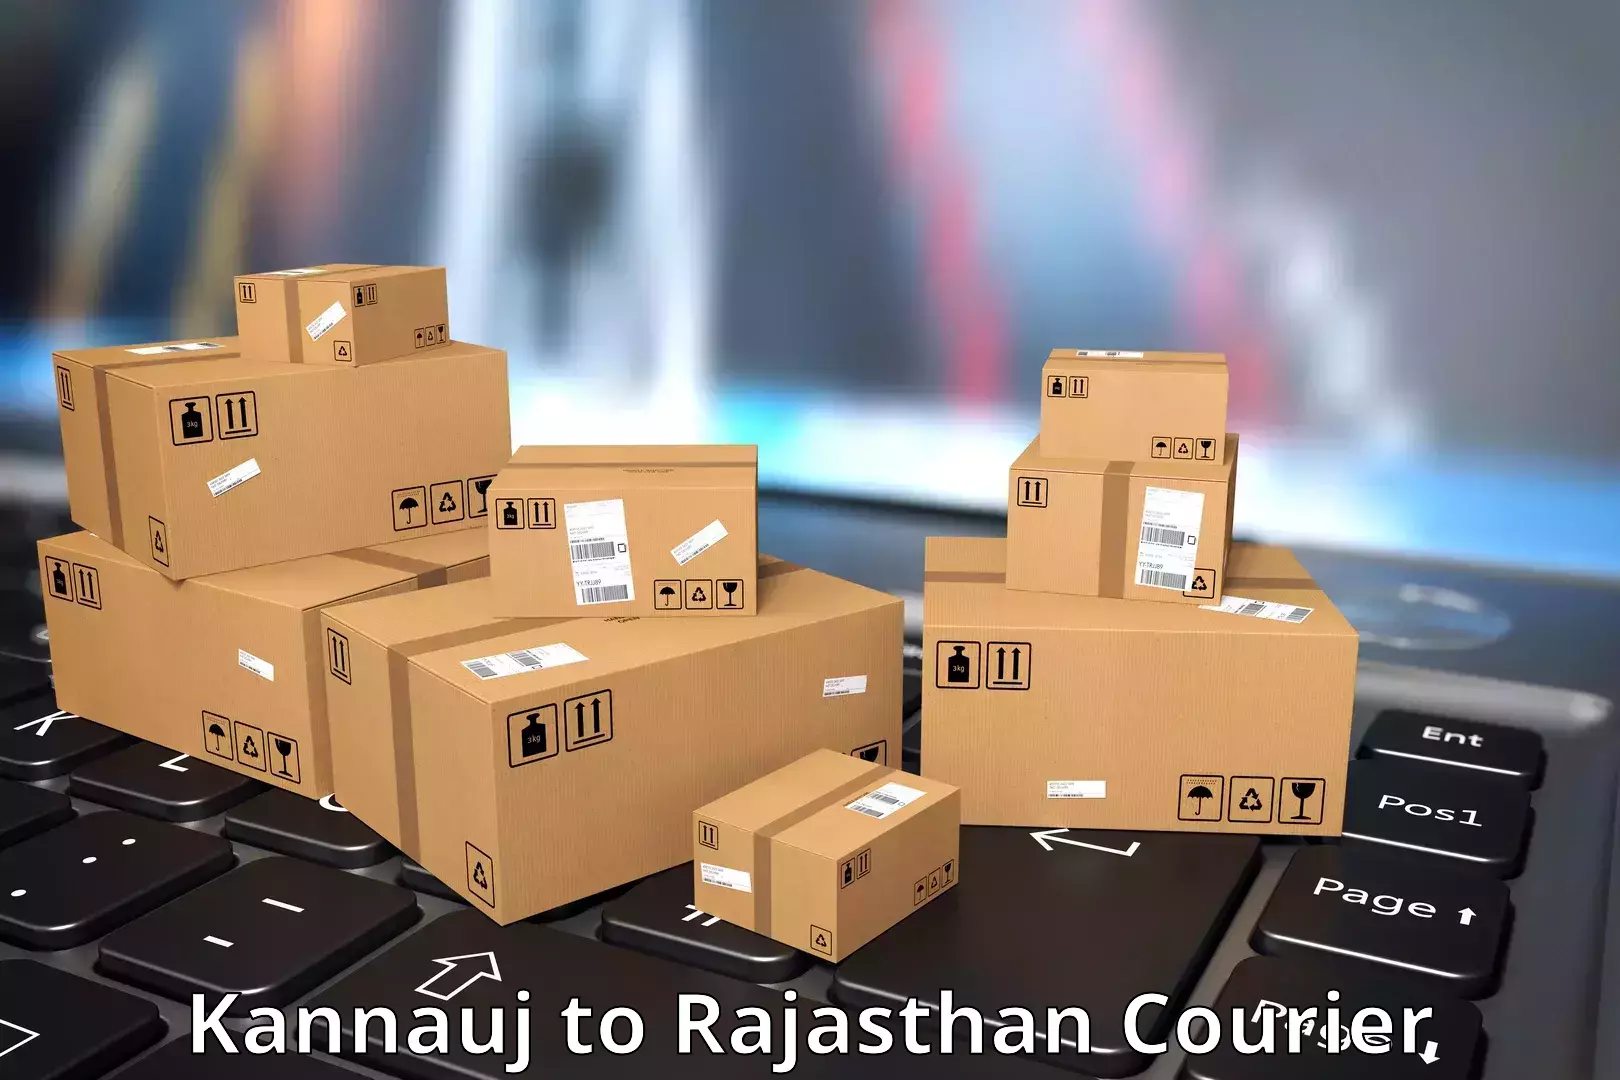 Parcel service for businesses Kannauj to Khanpur